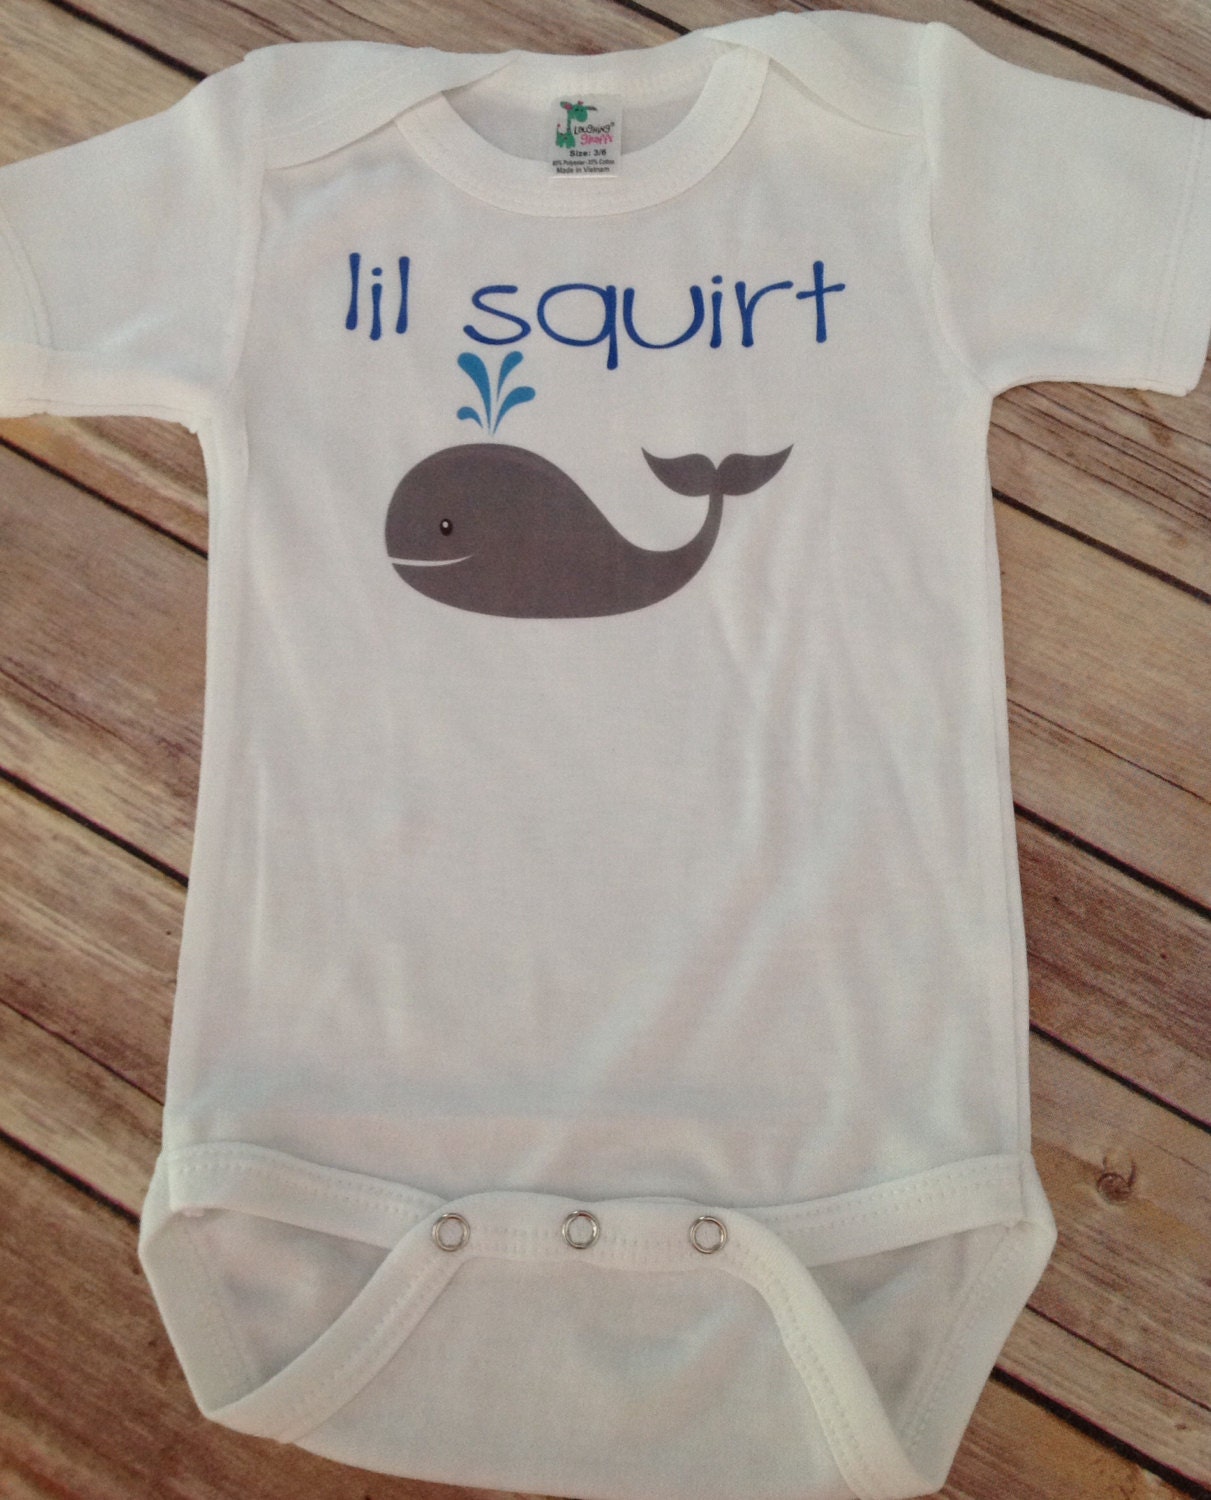 Whale lil squirt Baby One Piece or Shirt Custom